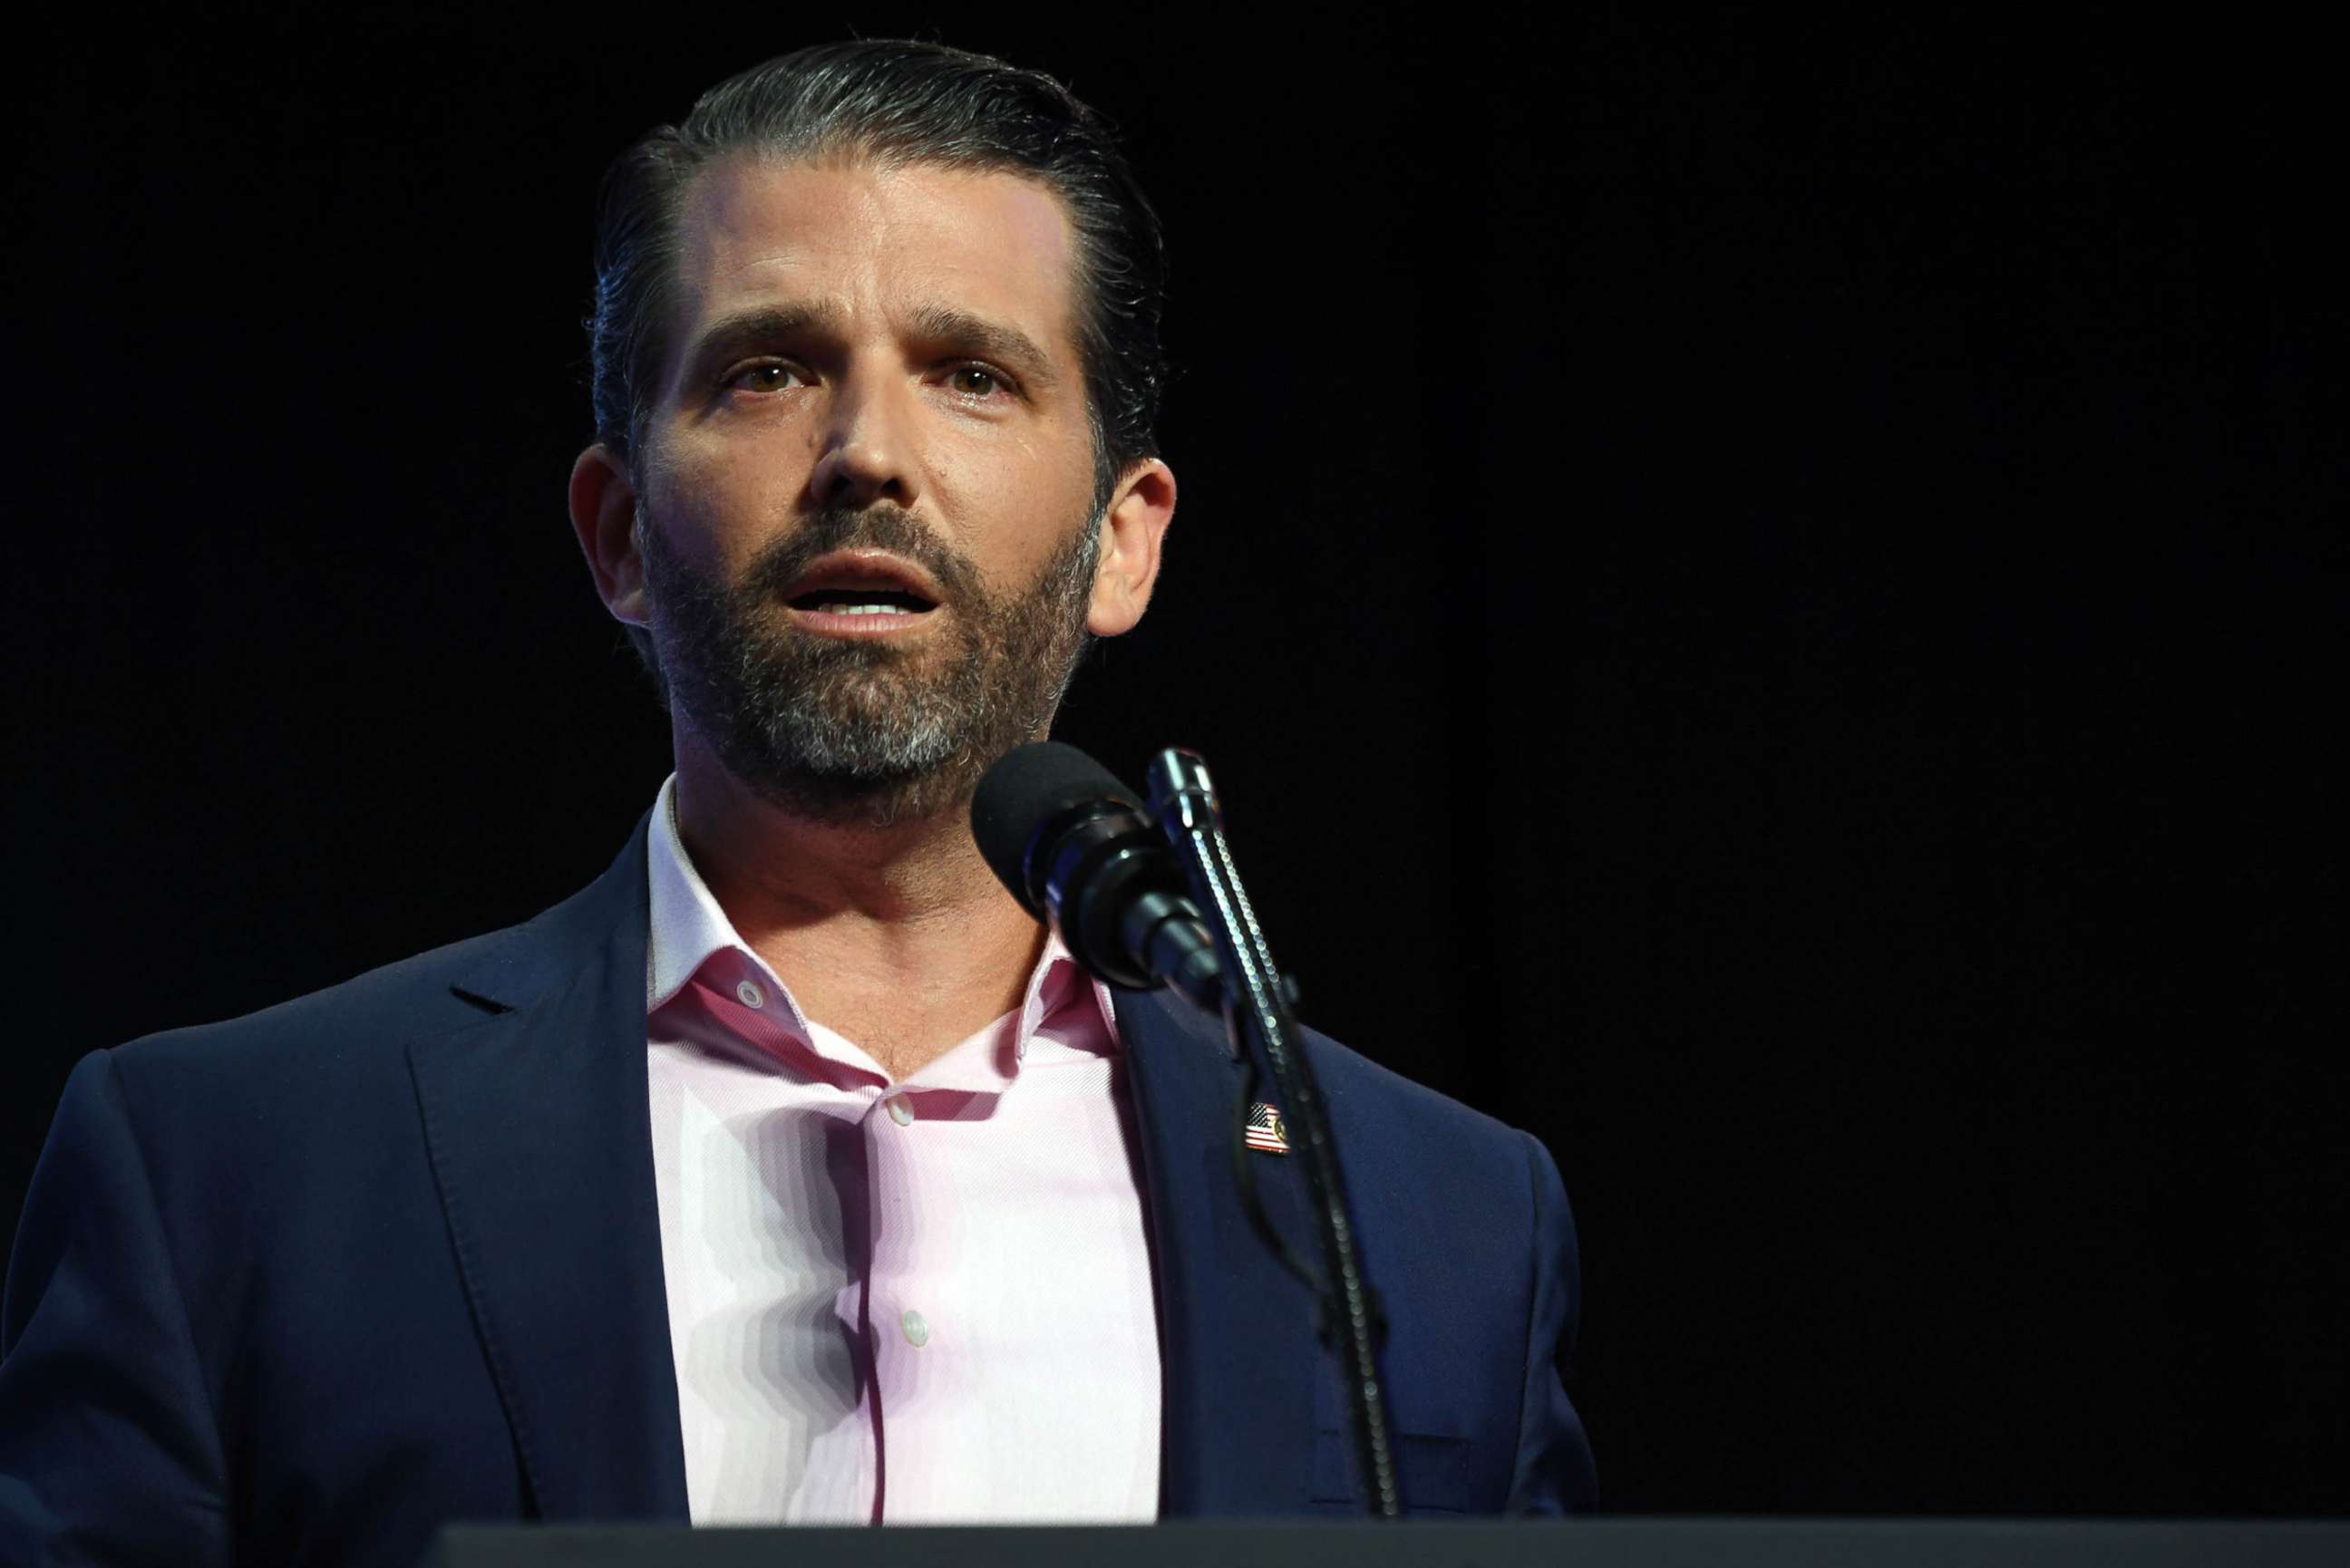 PHOTO: Donald Trump Jr. speaks during a Students for Trump event at the Dream City Church in Phoenix, June 23, 2020.